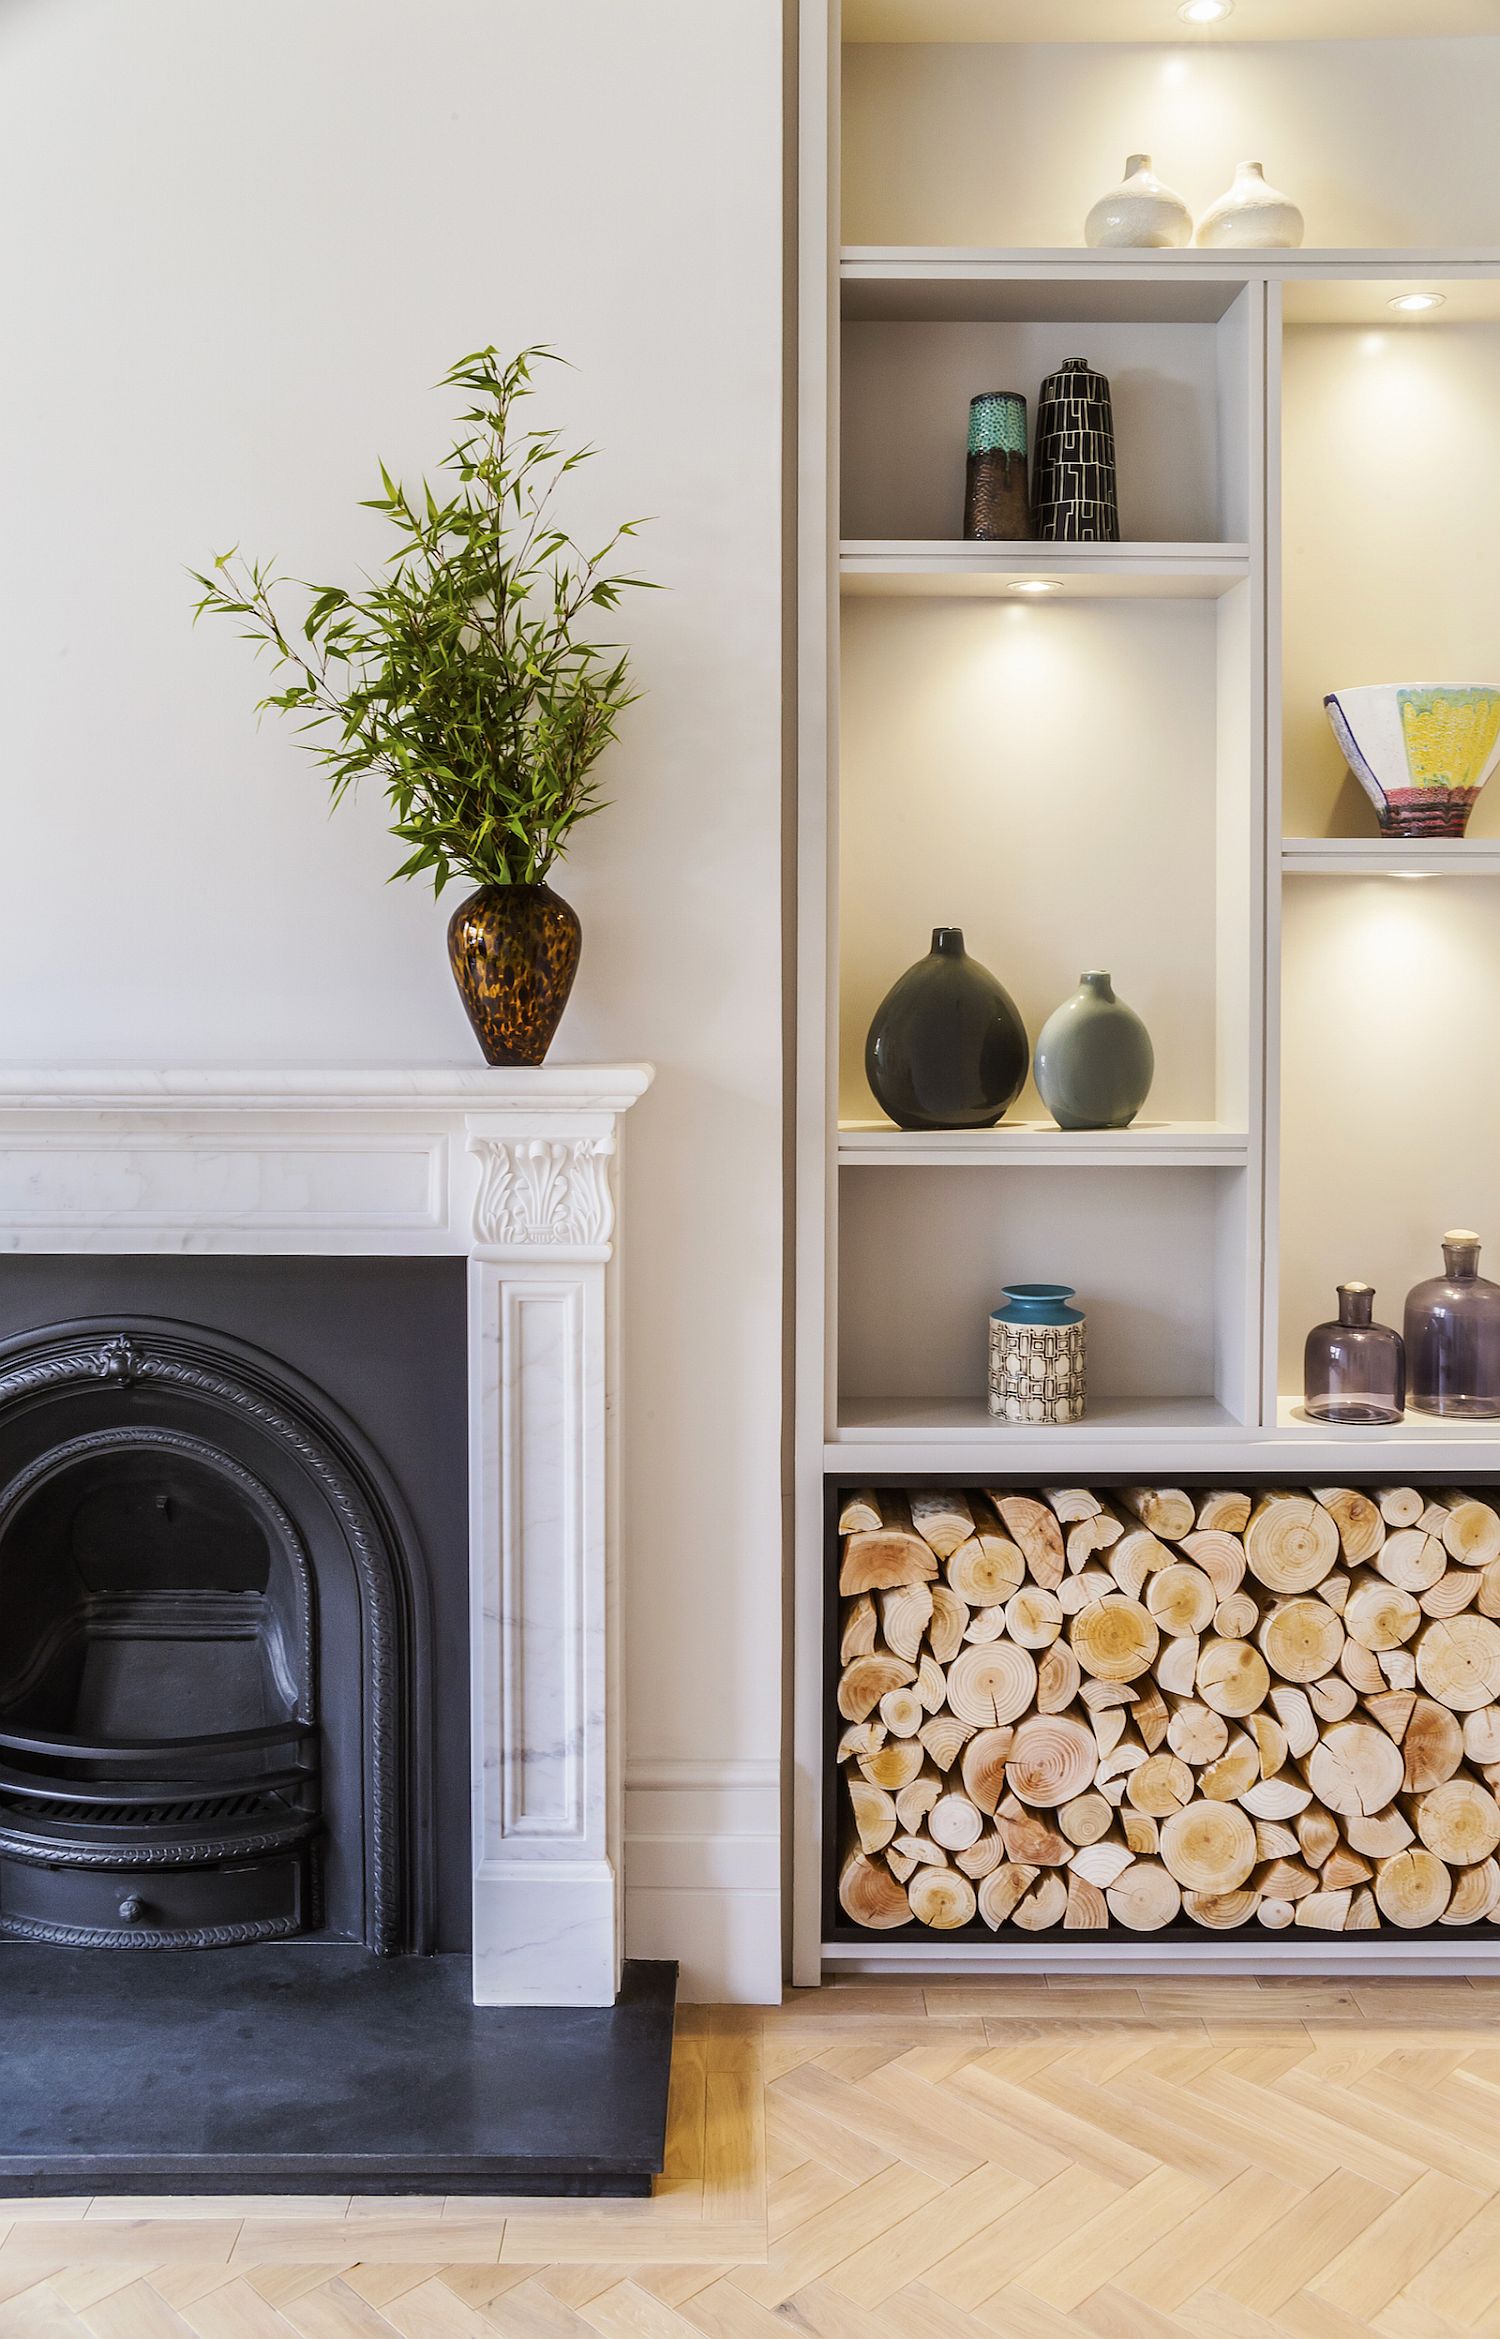 Enhanced Victorian features of the revamped London townhouse